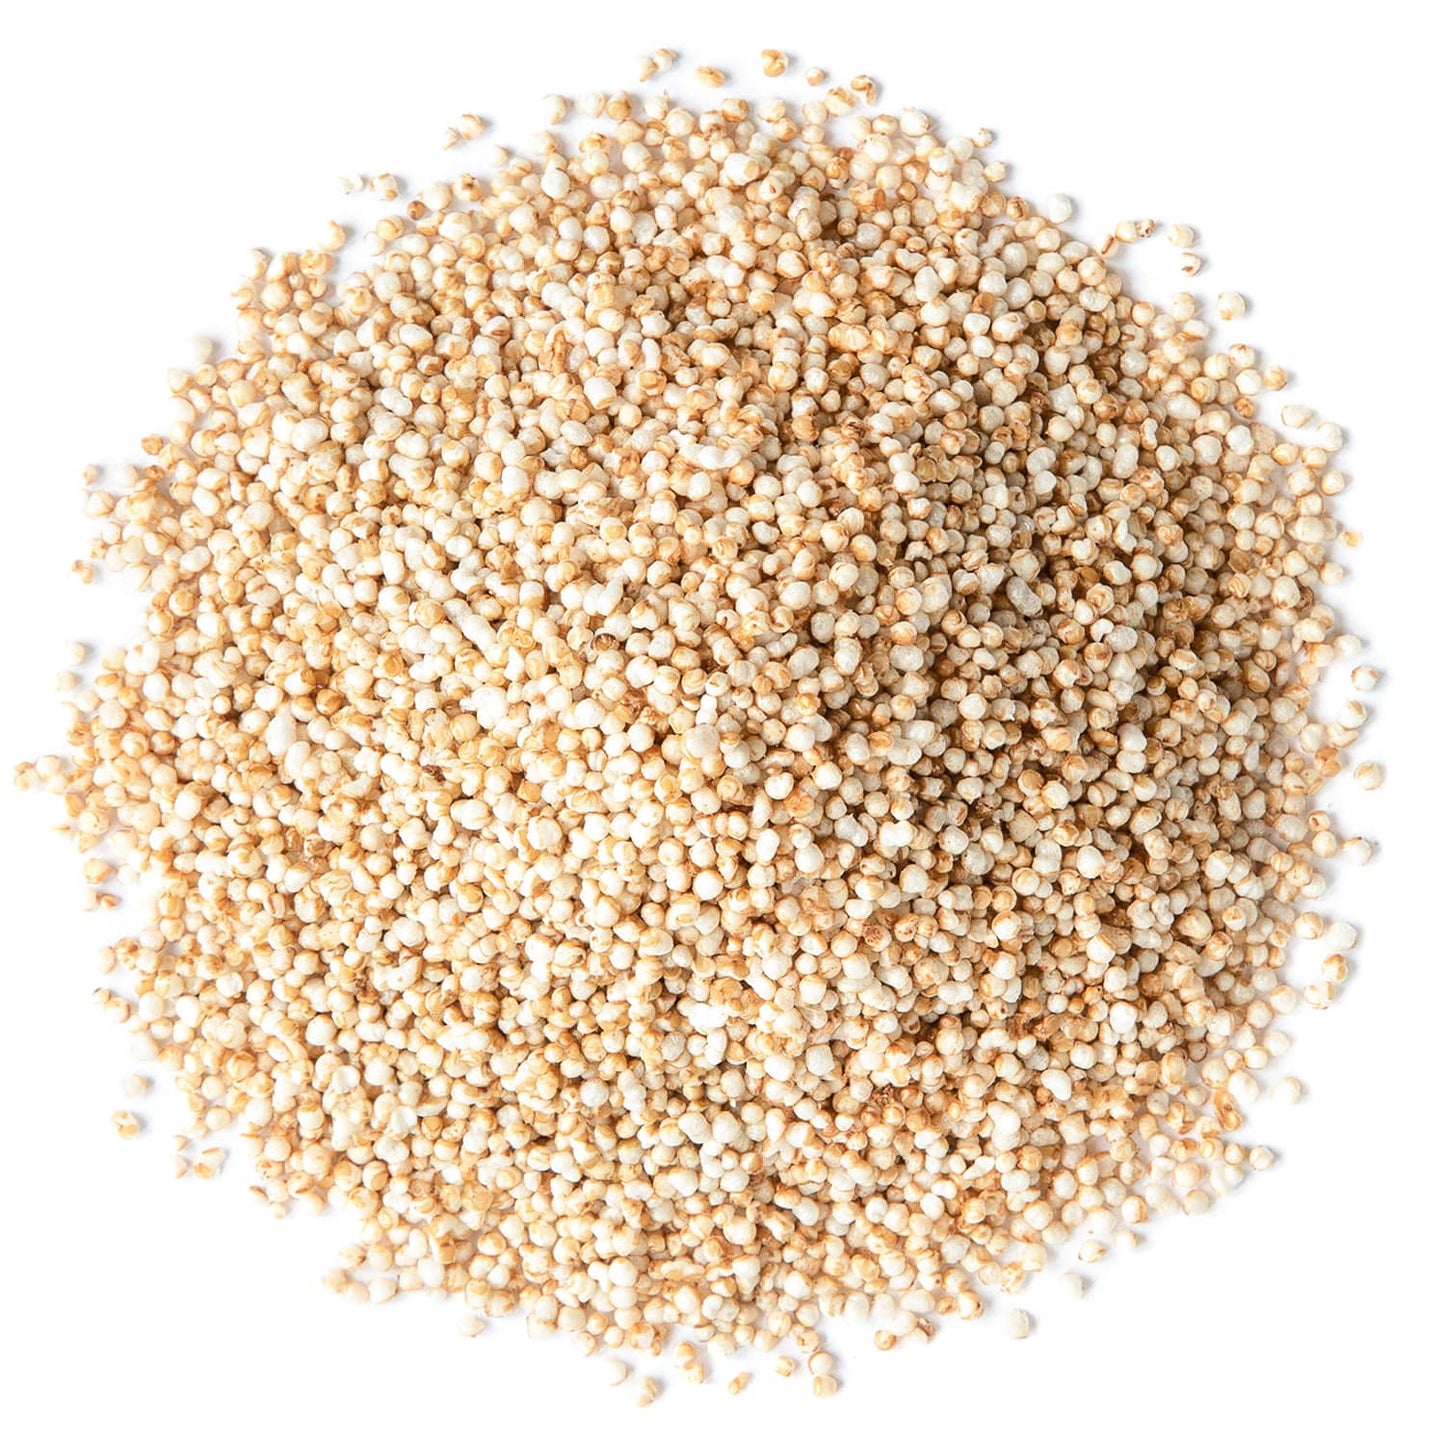 Organic Popped Amaranth, X Pounds – Non-GMO Puffed Seeds, No Sugar Added, Vegan, Bulk Grain. Good Source of Protein. Great Pop Snack. Perfect as Topping for Breakfast Cereal, Porridge, Yogurt